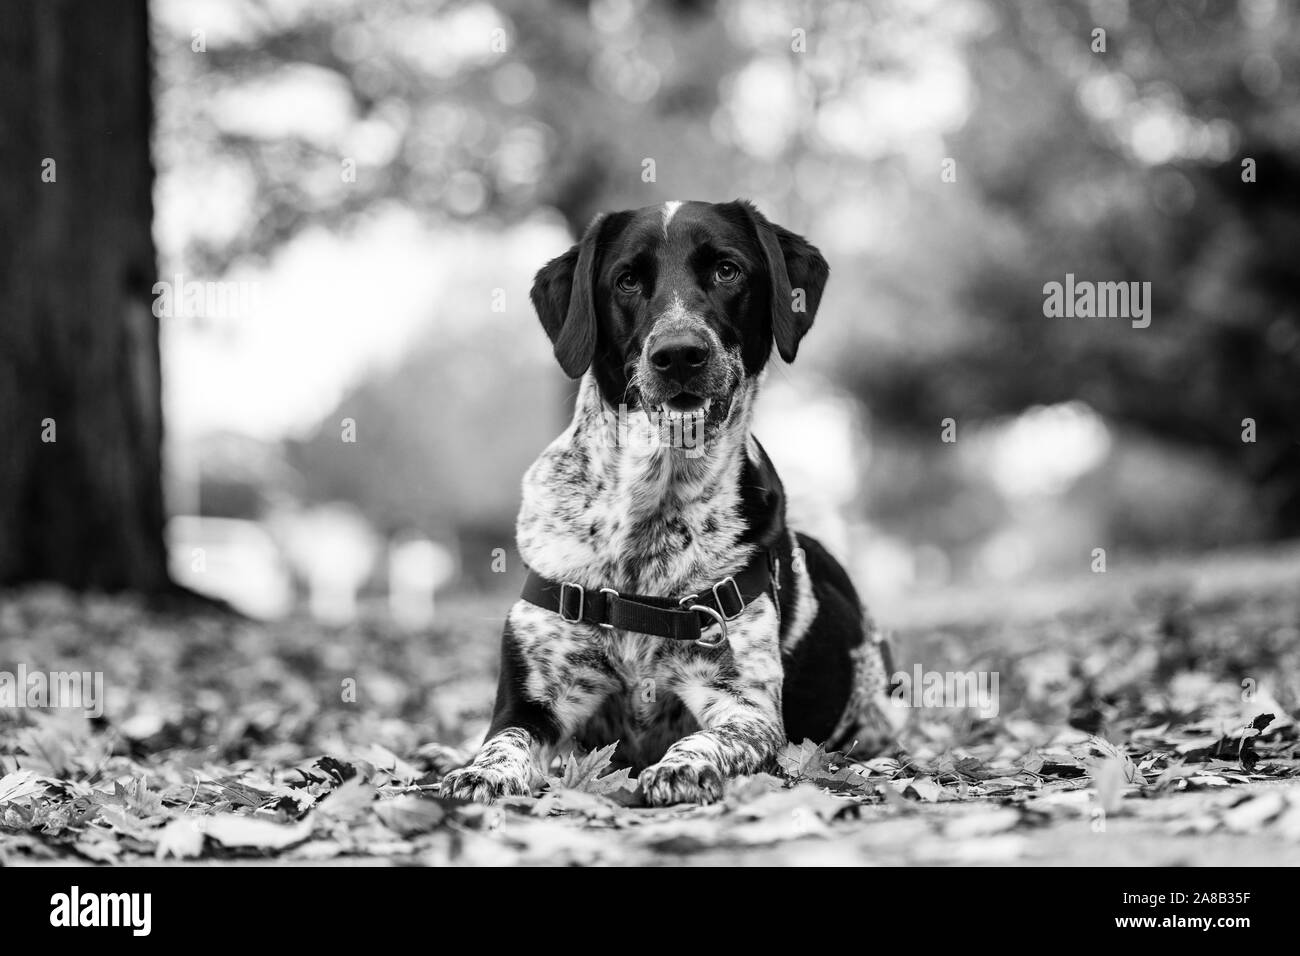 Black and white dog laying in autumn leaves with its mouth open. Black and white. Stock Photo